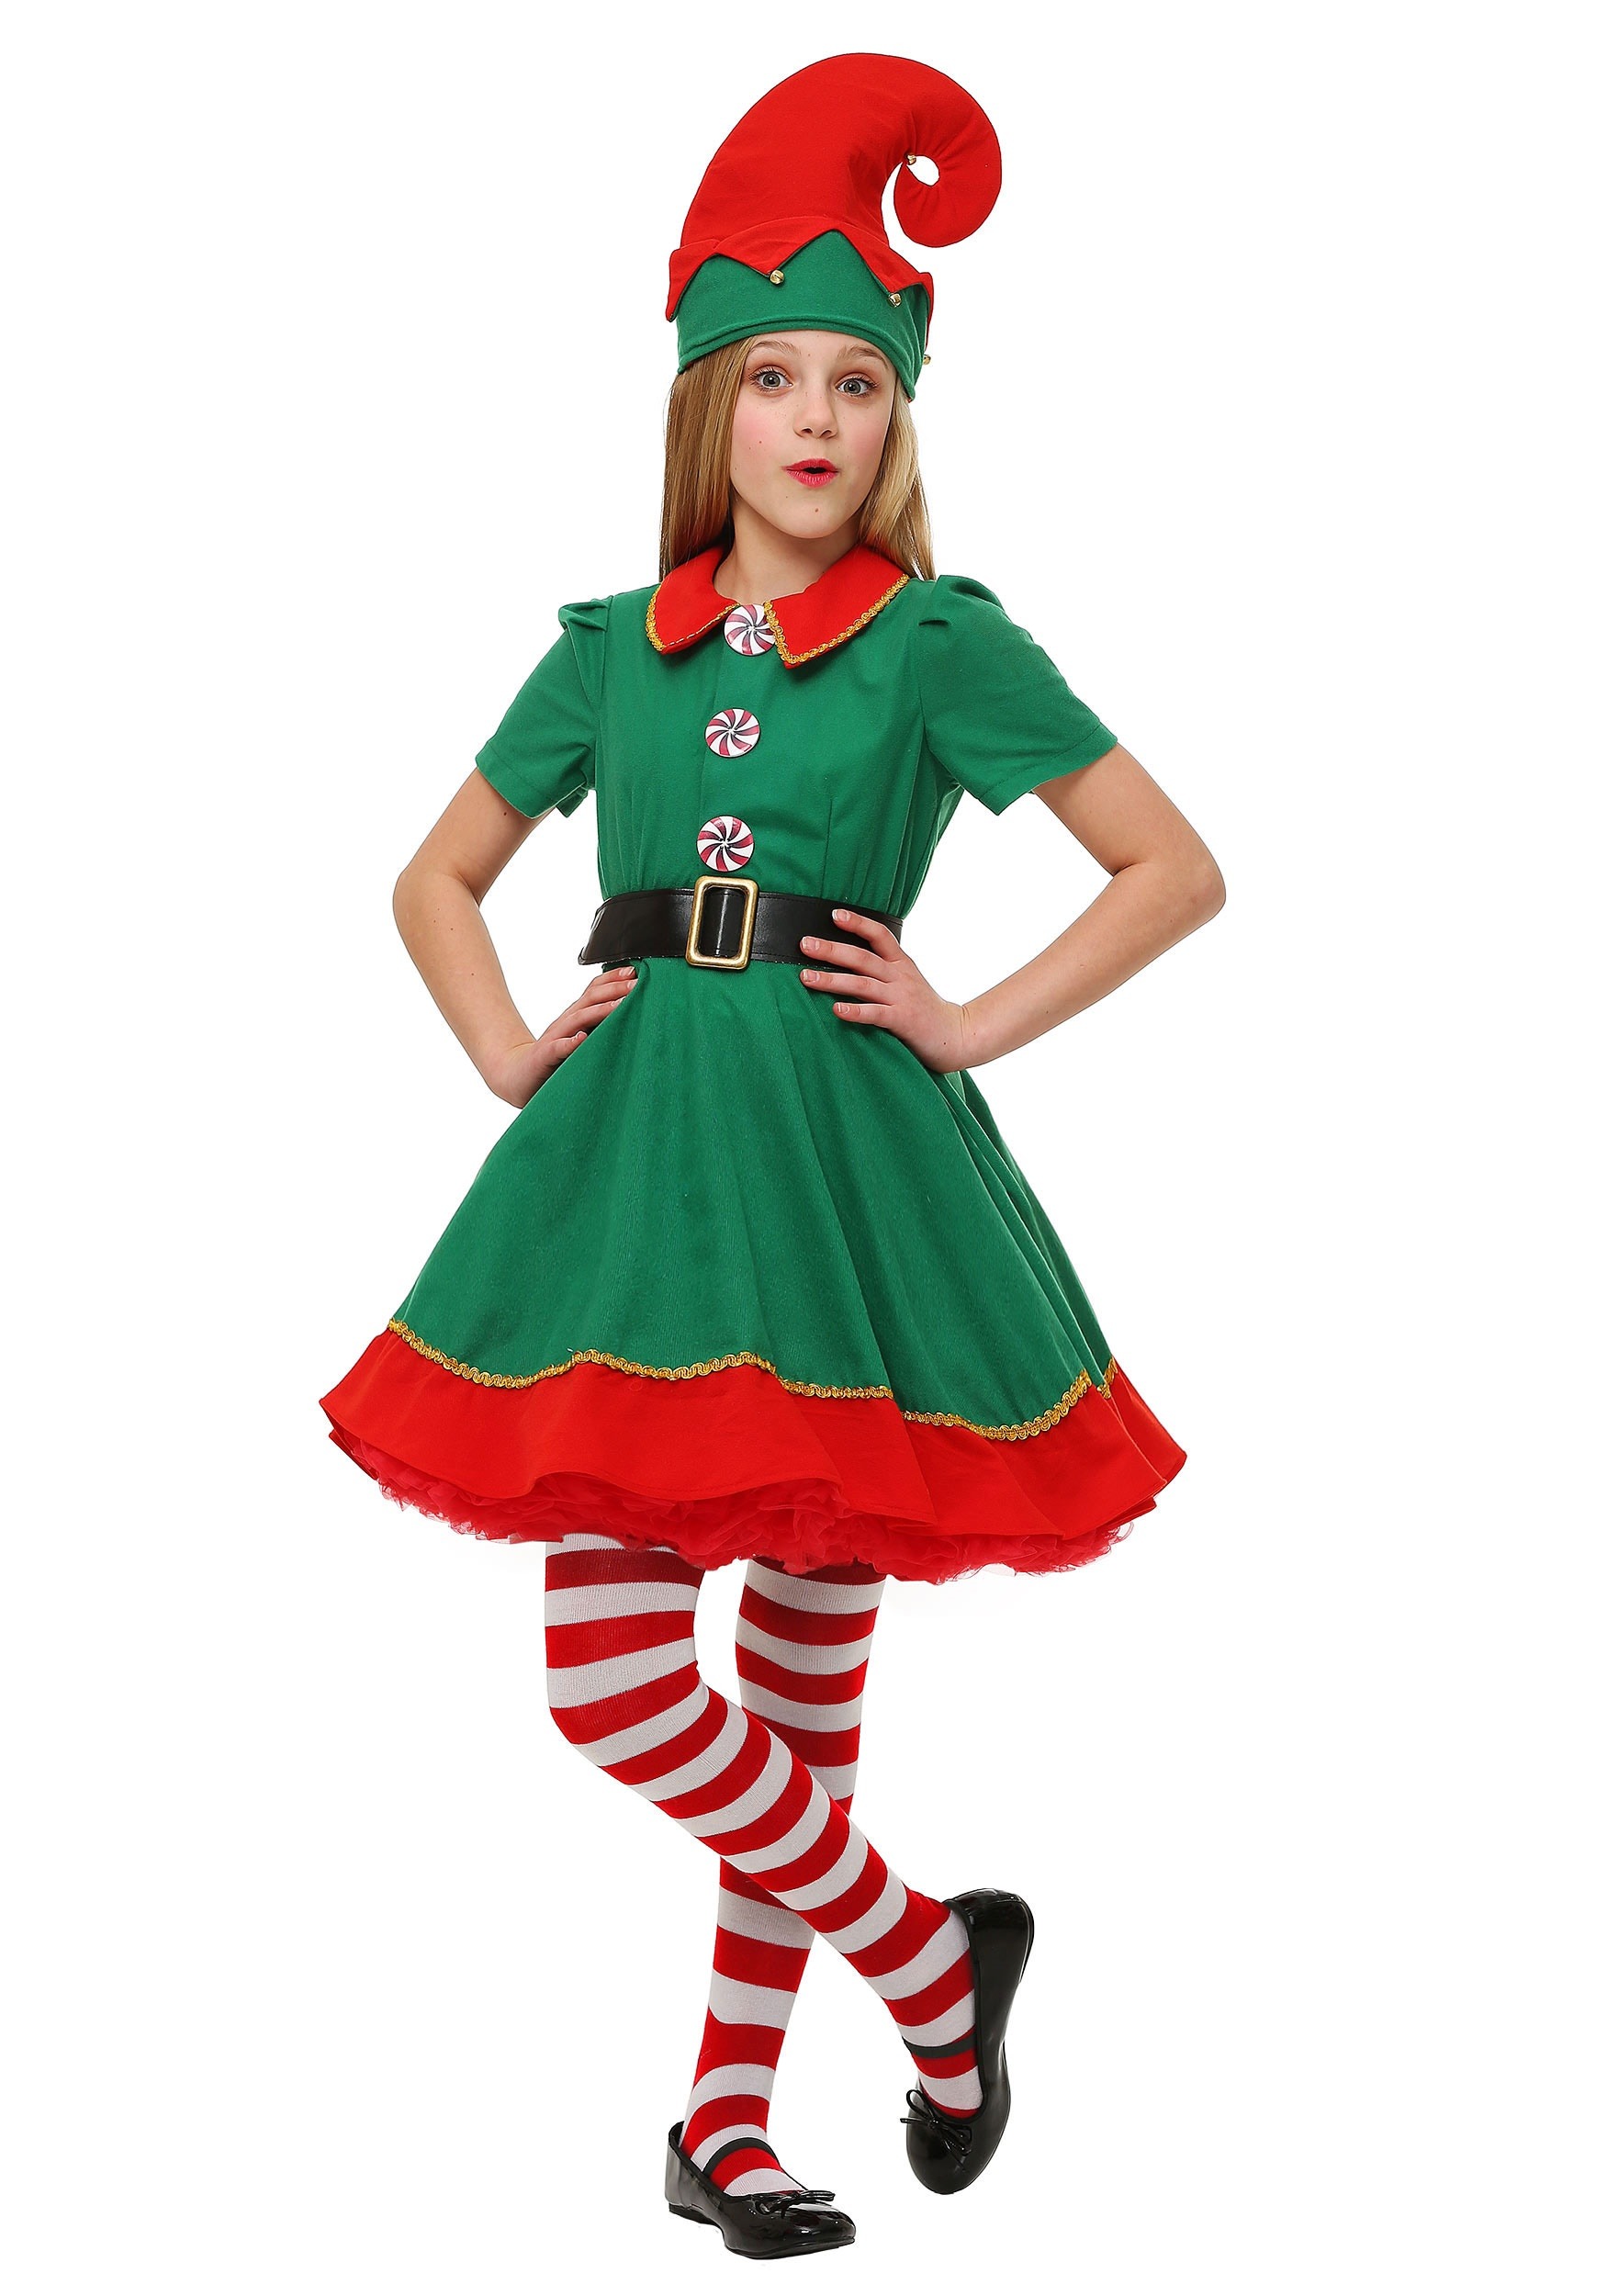 Photos - Fancy Dress Holiday FUN Costumes  Elf Costume for Girls Green/Red FUN2177CH 